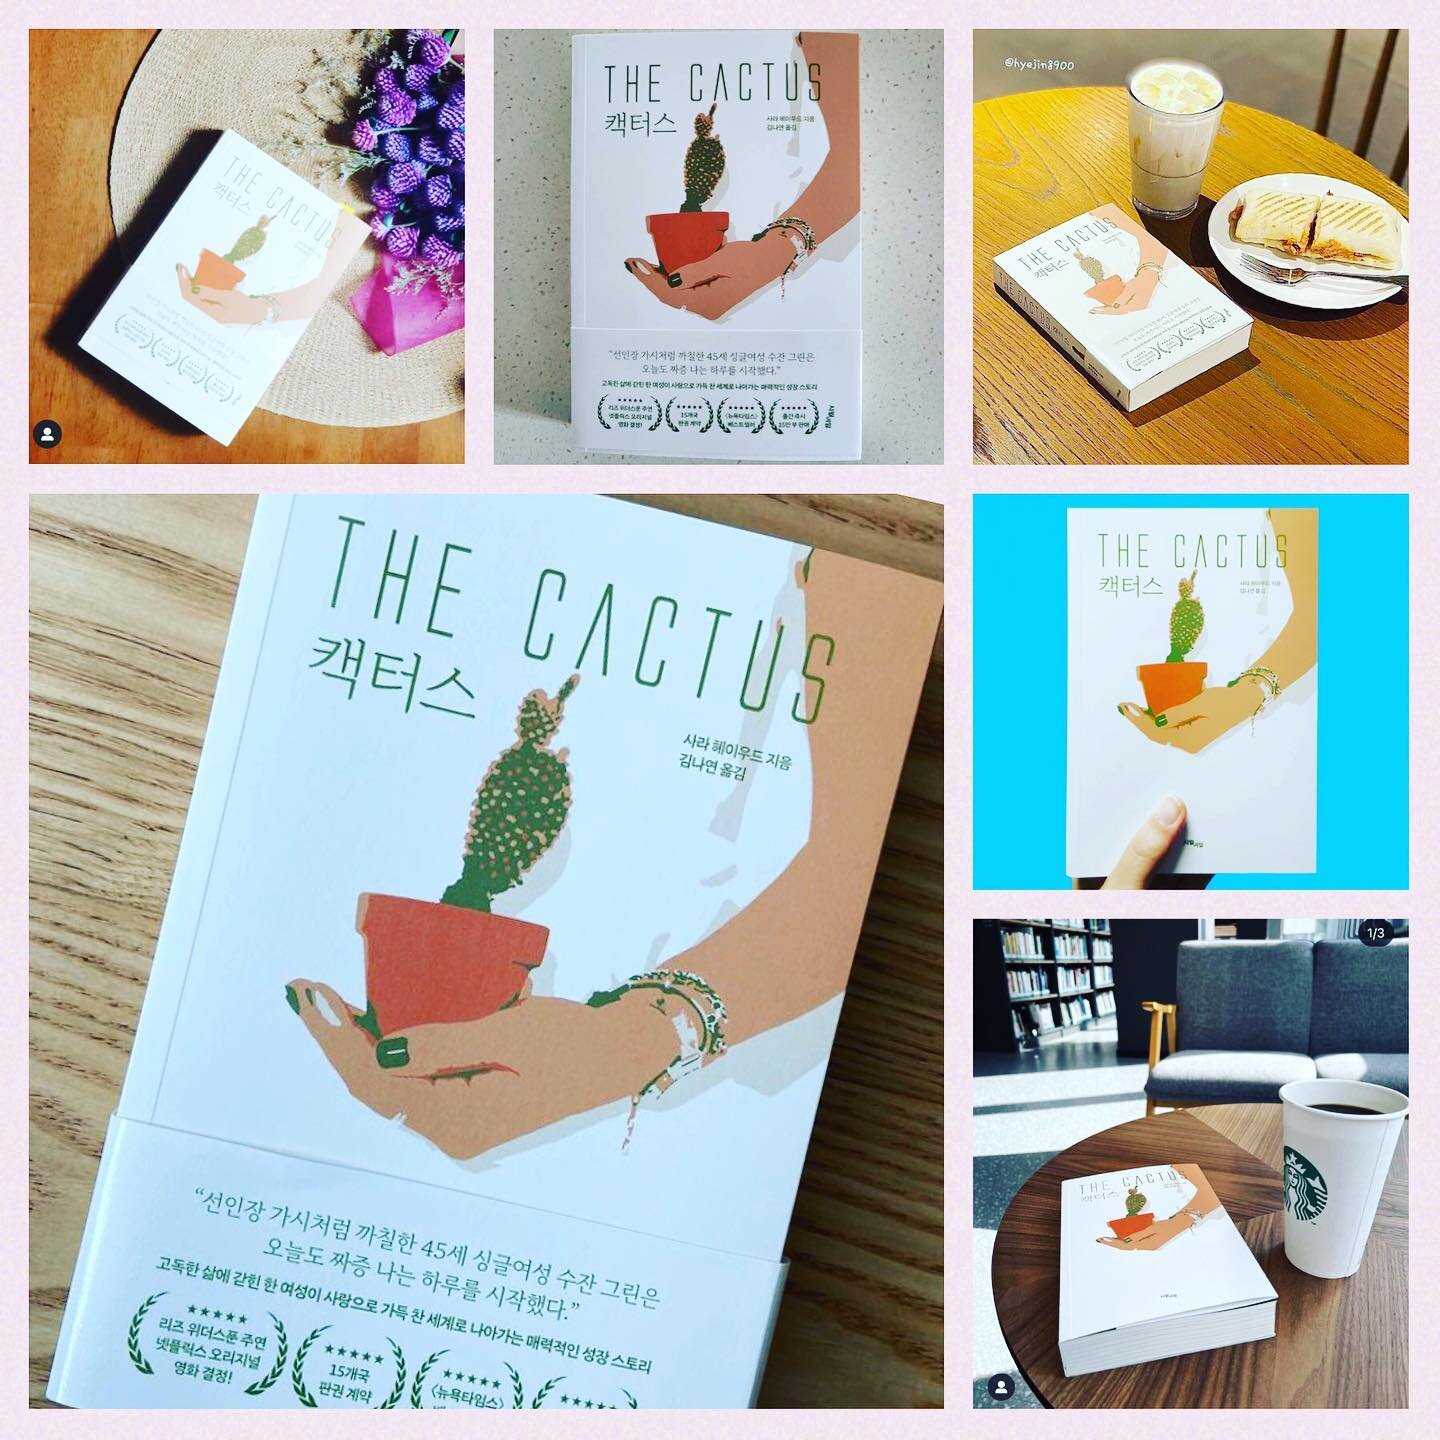 It&rsquo;s always exciting to see a new edition of The Cactus out in the world. This is the just-published South Korean edition. Huge thanks to the publishing team for their fantastic cover design. I love the simplicity and cartoon-like style of this